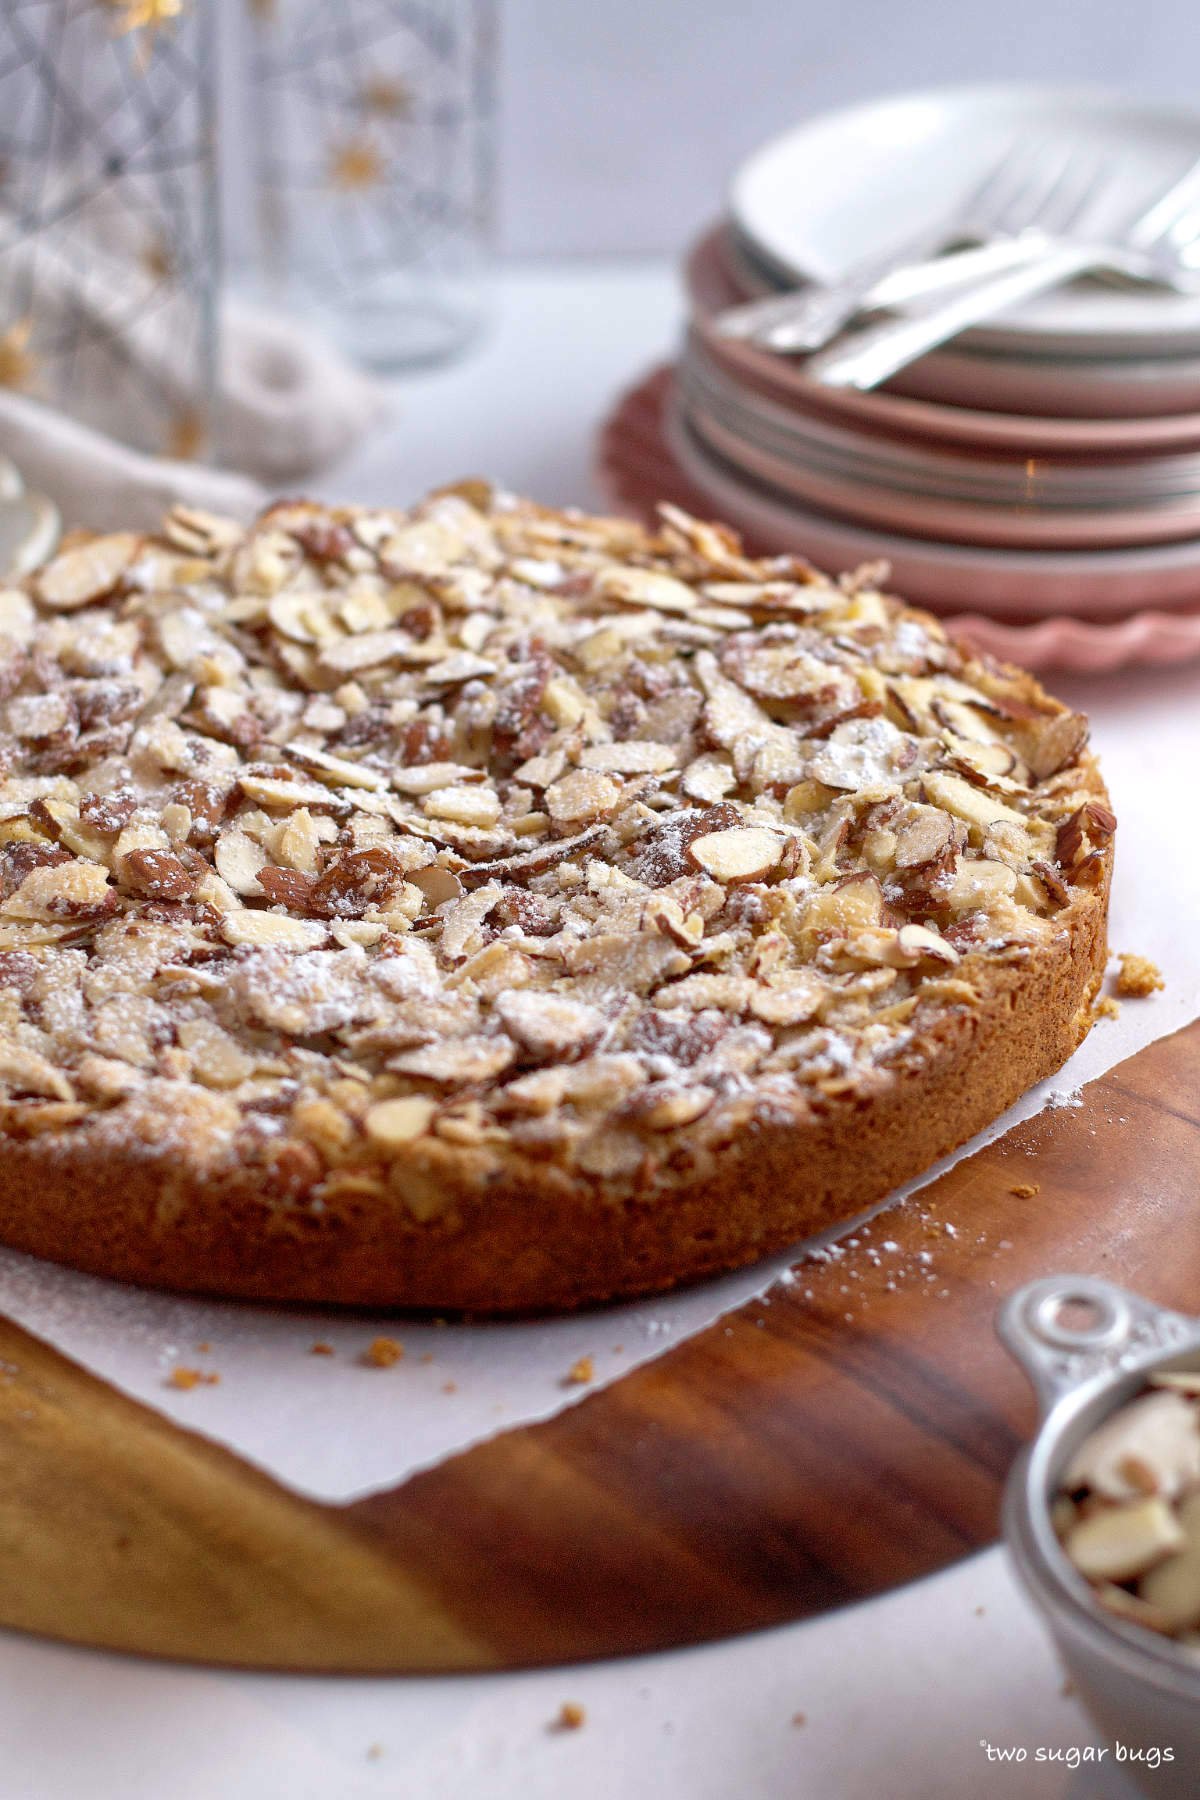 Italian cake with almond topping on a serving platter